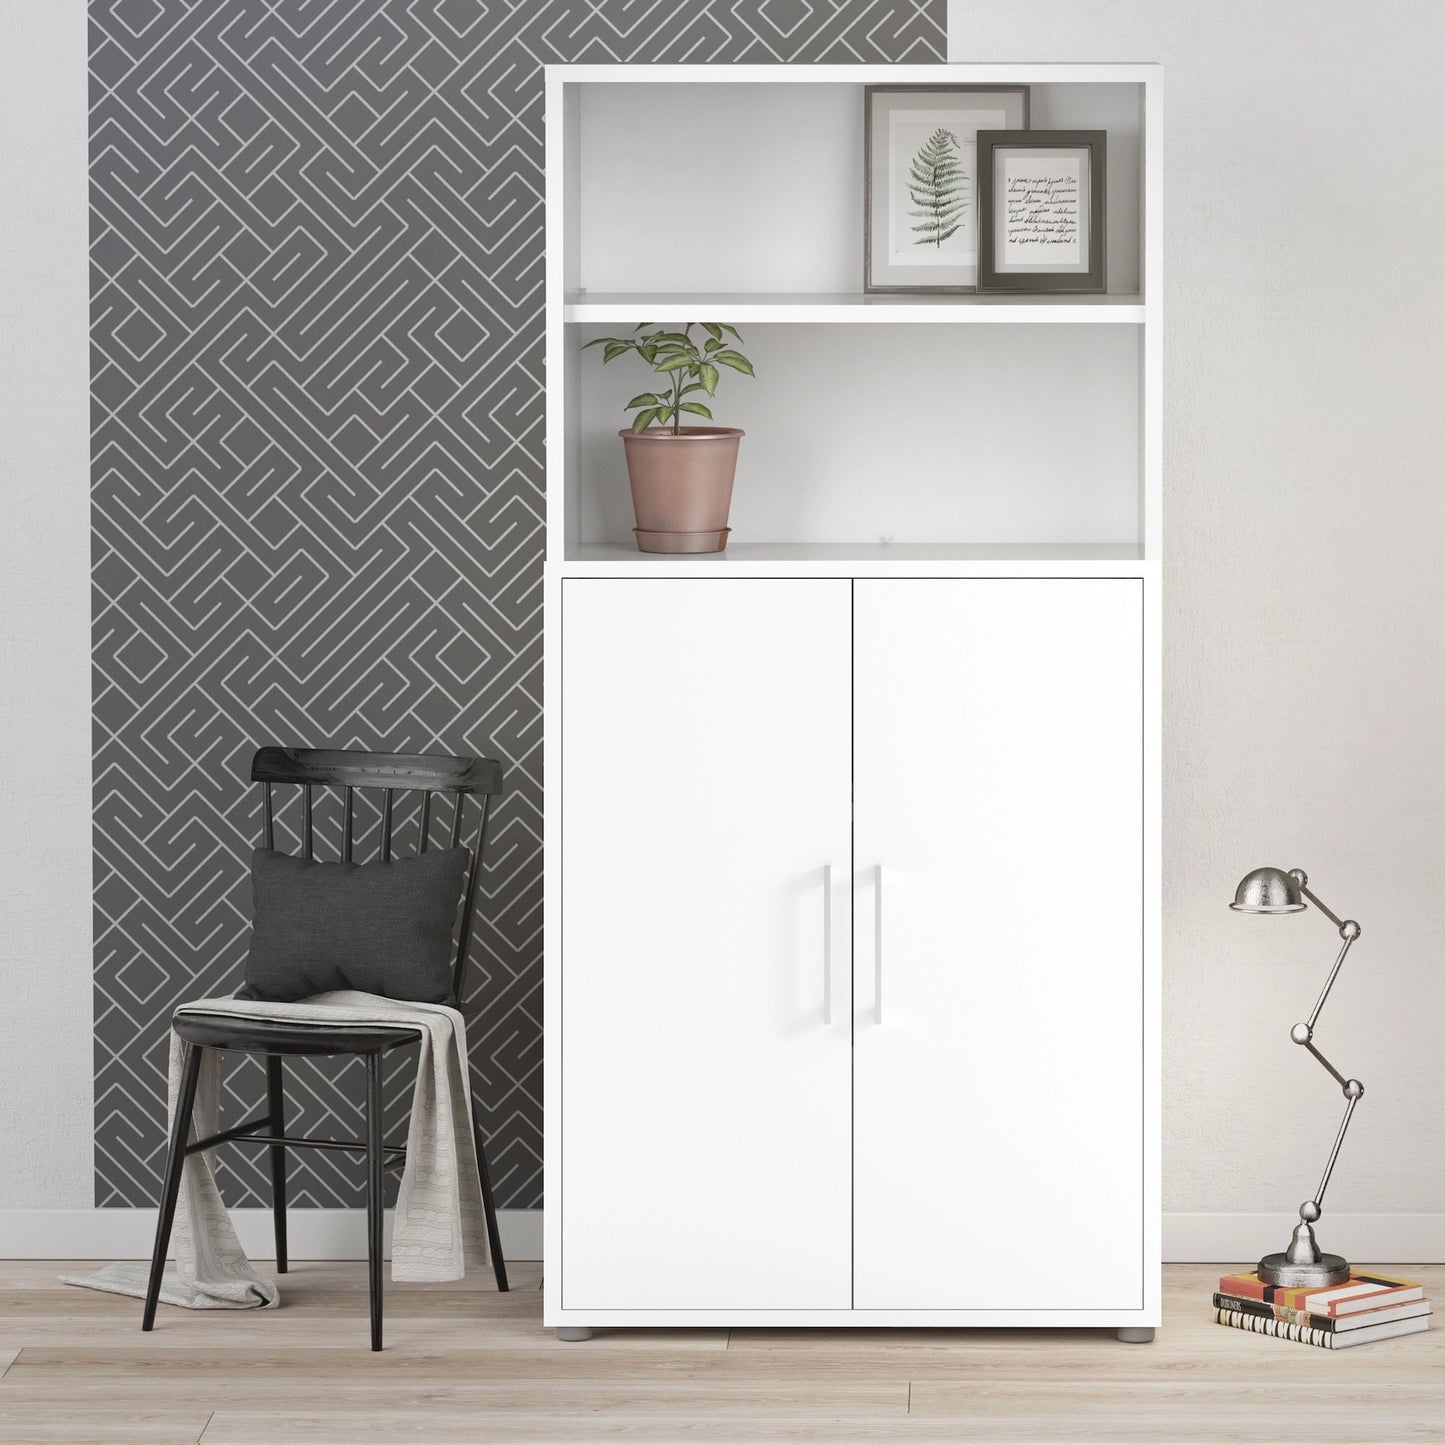 Furniture To Go Prima Bookcase 3 Shelves with 2 Doors in White